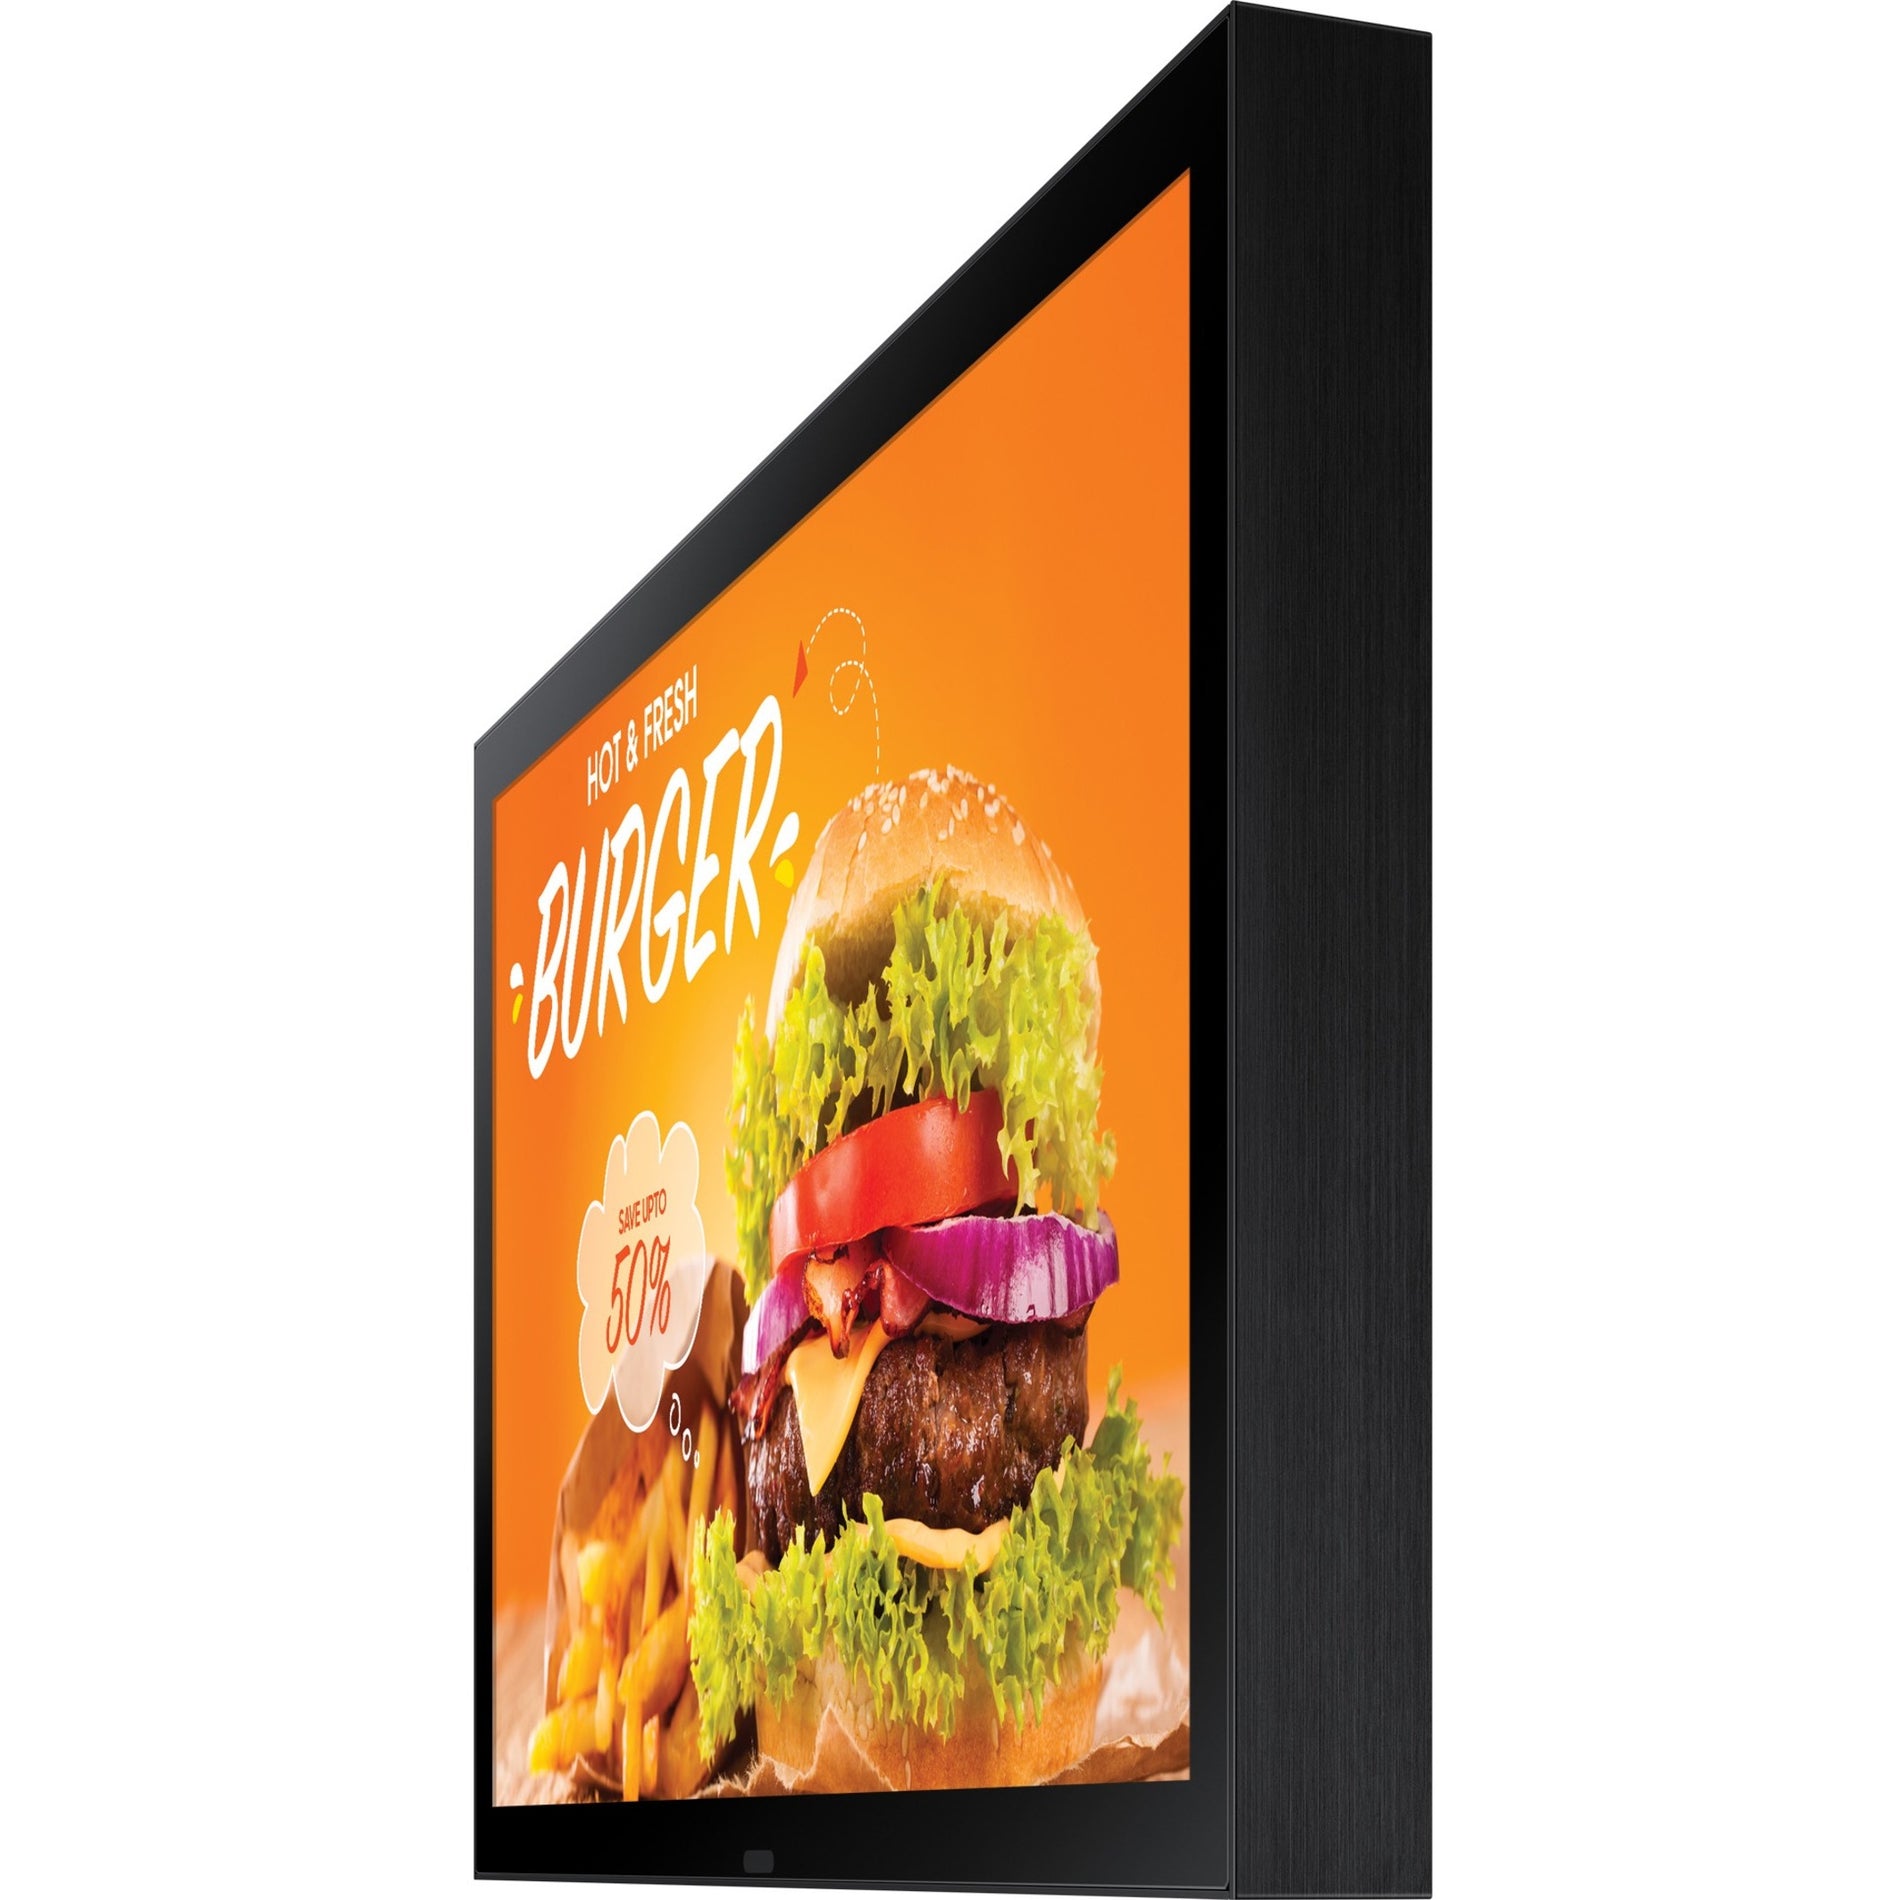 Samsung OH24B Digital Signage Display/Appliance, 24-inch High Brightness Commercial LFD Outdoor Display